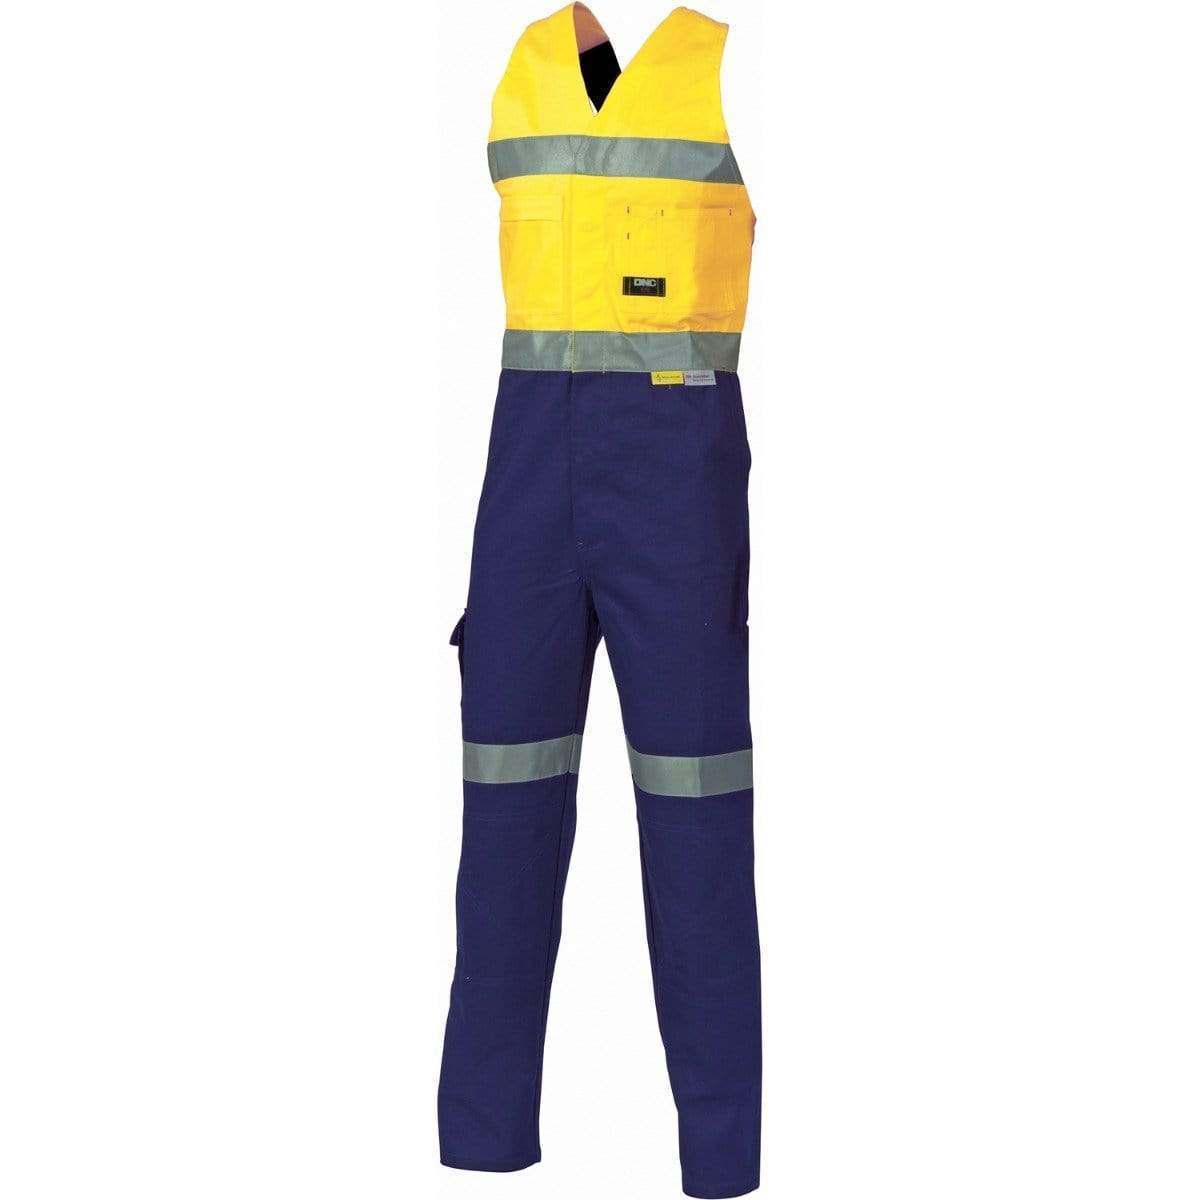 Dnc Workwear Hi-vis Cotton Action Back With 3m Reflective Tape - 3857 Work Wear DNC Workwear Yellow/Navy 77R 